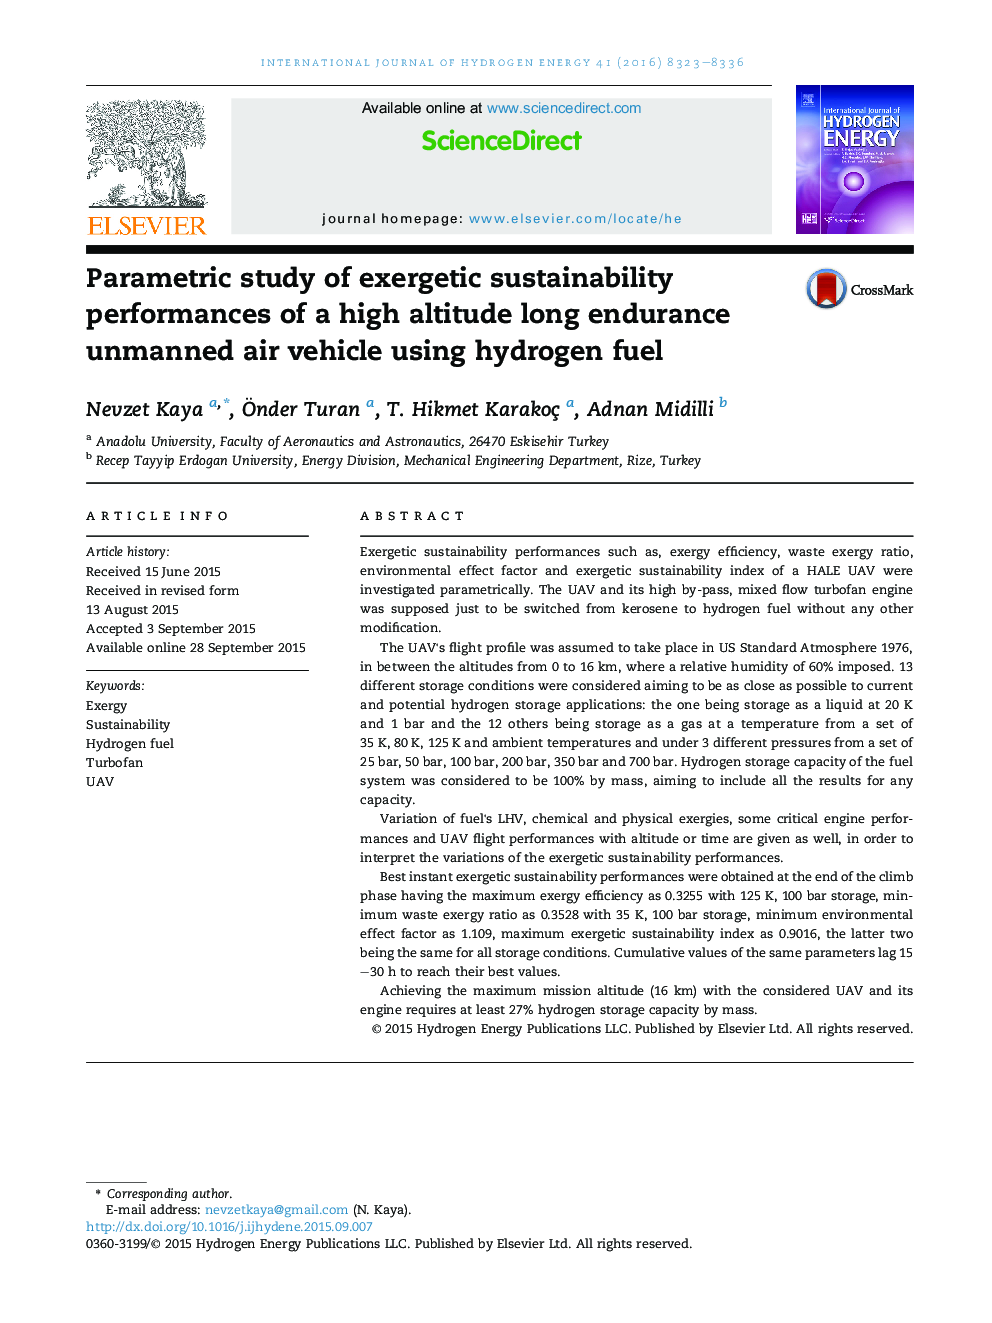 Parametric study of exergetic sustainability performances of a high altitude long endurance unmanned air vehicle using hydrogen fuel